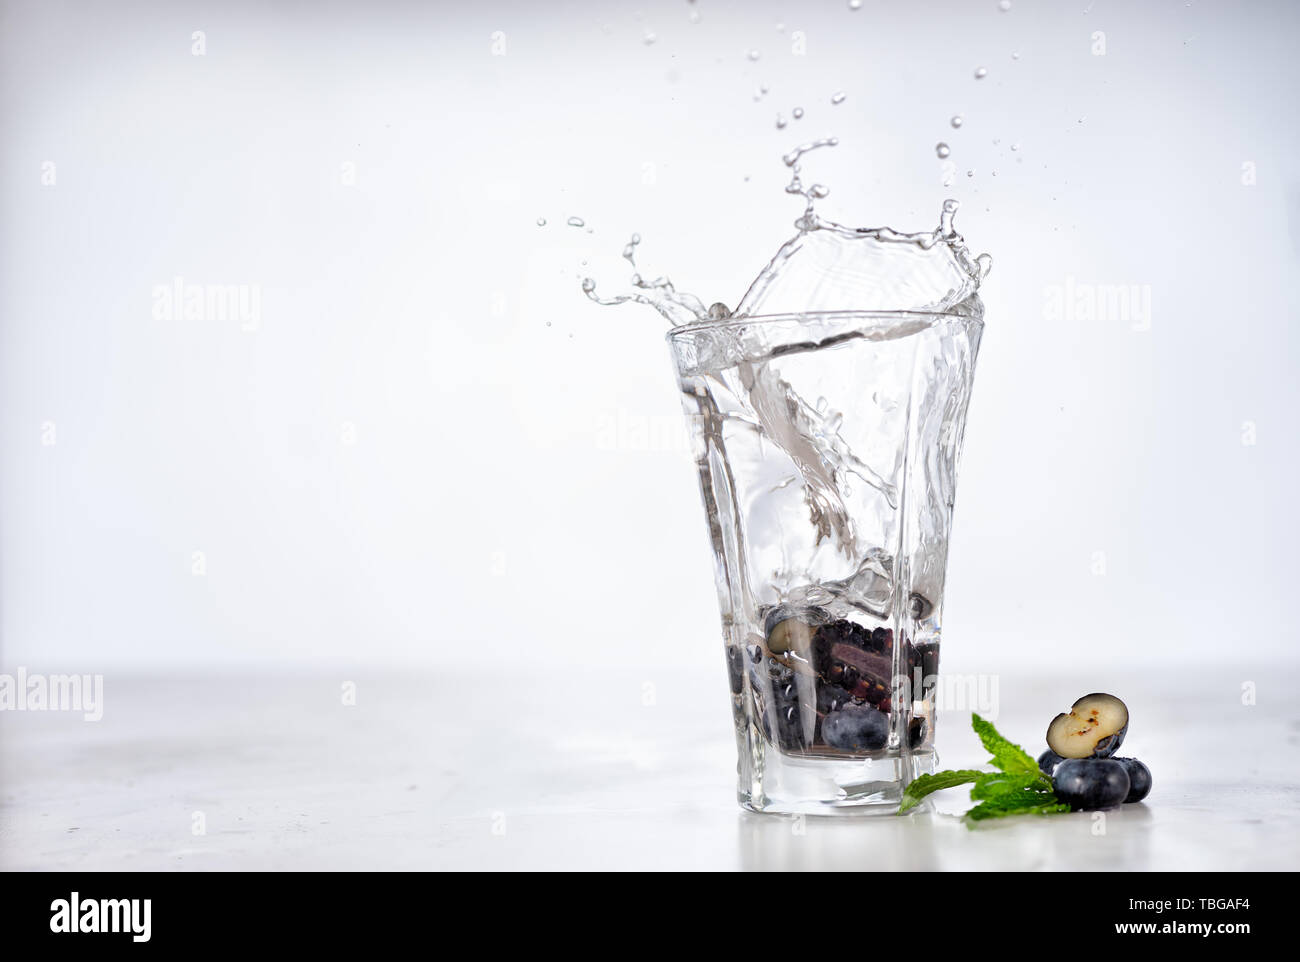 Splash into glass of infused water with berries and mint Stock Photo